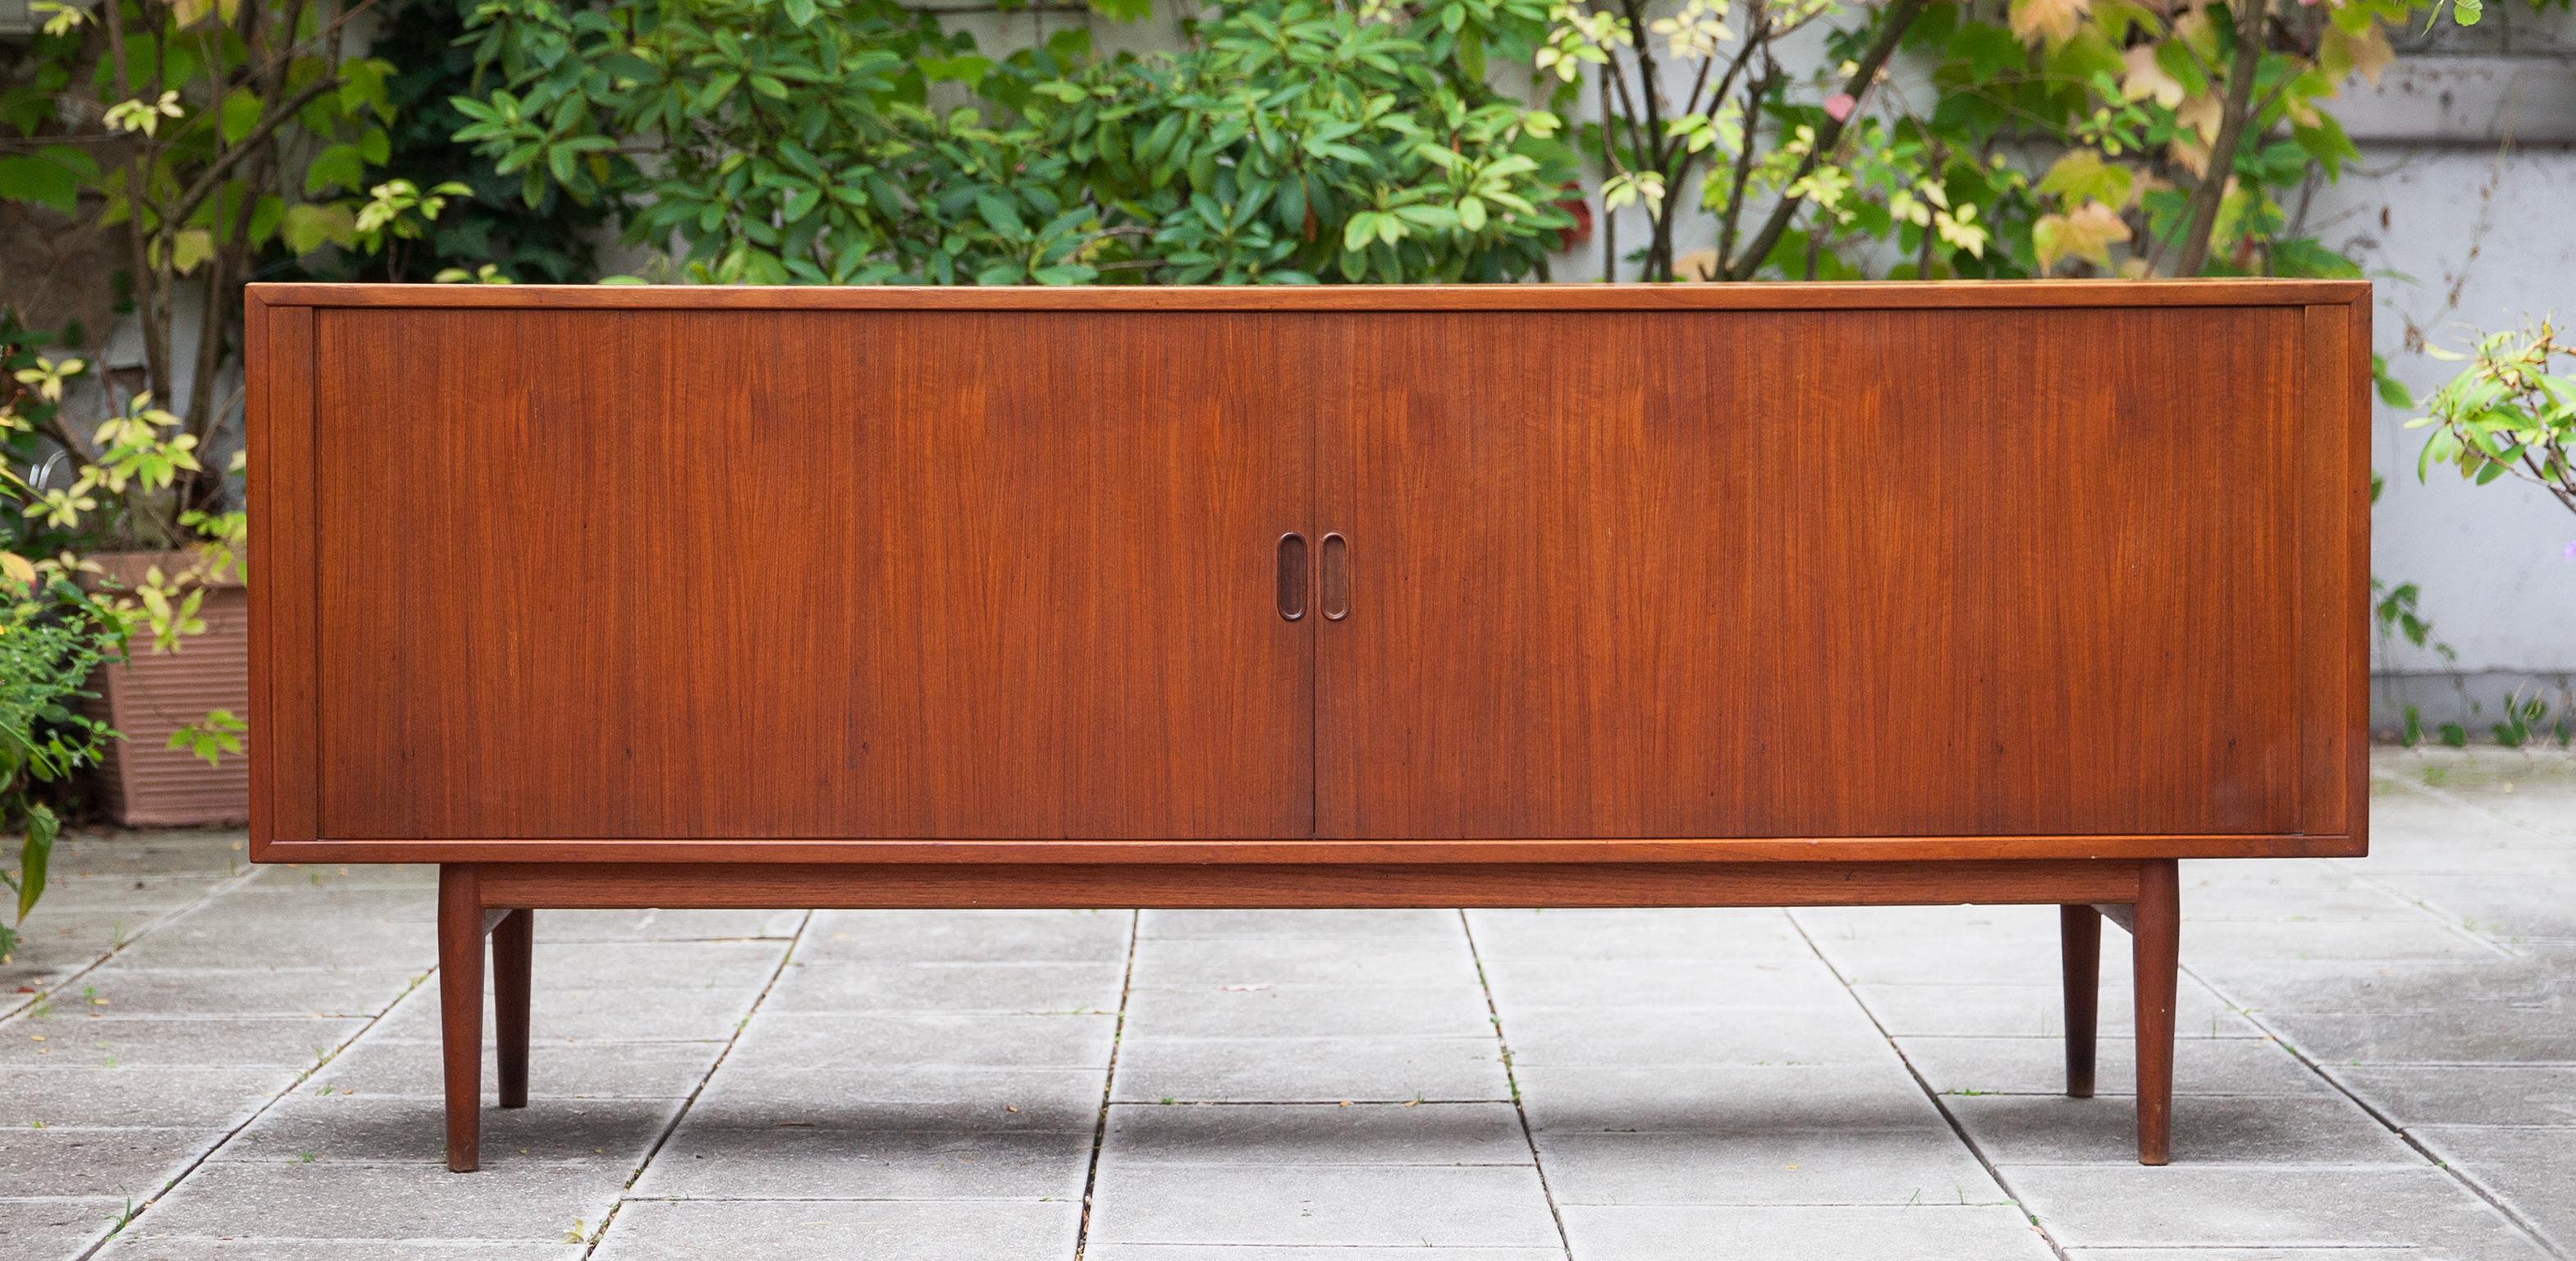 Scandinavian modern sideboard designed by Arne Vodder for Sibast.
Richly grained teak. Sideboard has tambour doors and shelves and 2 drawers behind. The inside of the sideboard is complete, nothing missing. This sideboard is finished all over so it